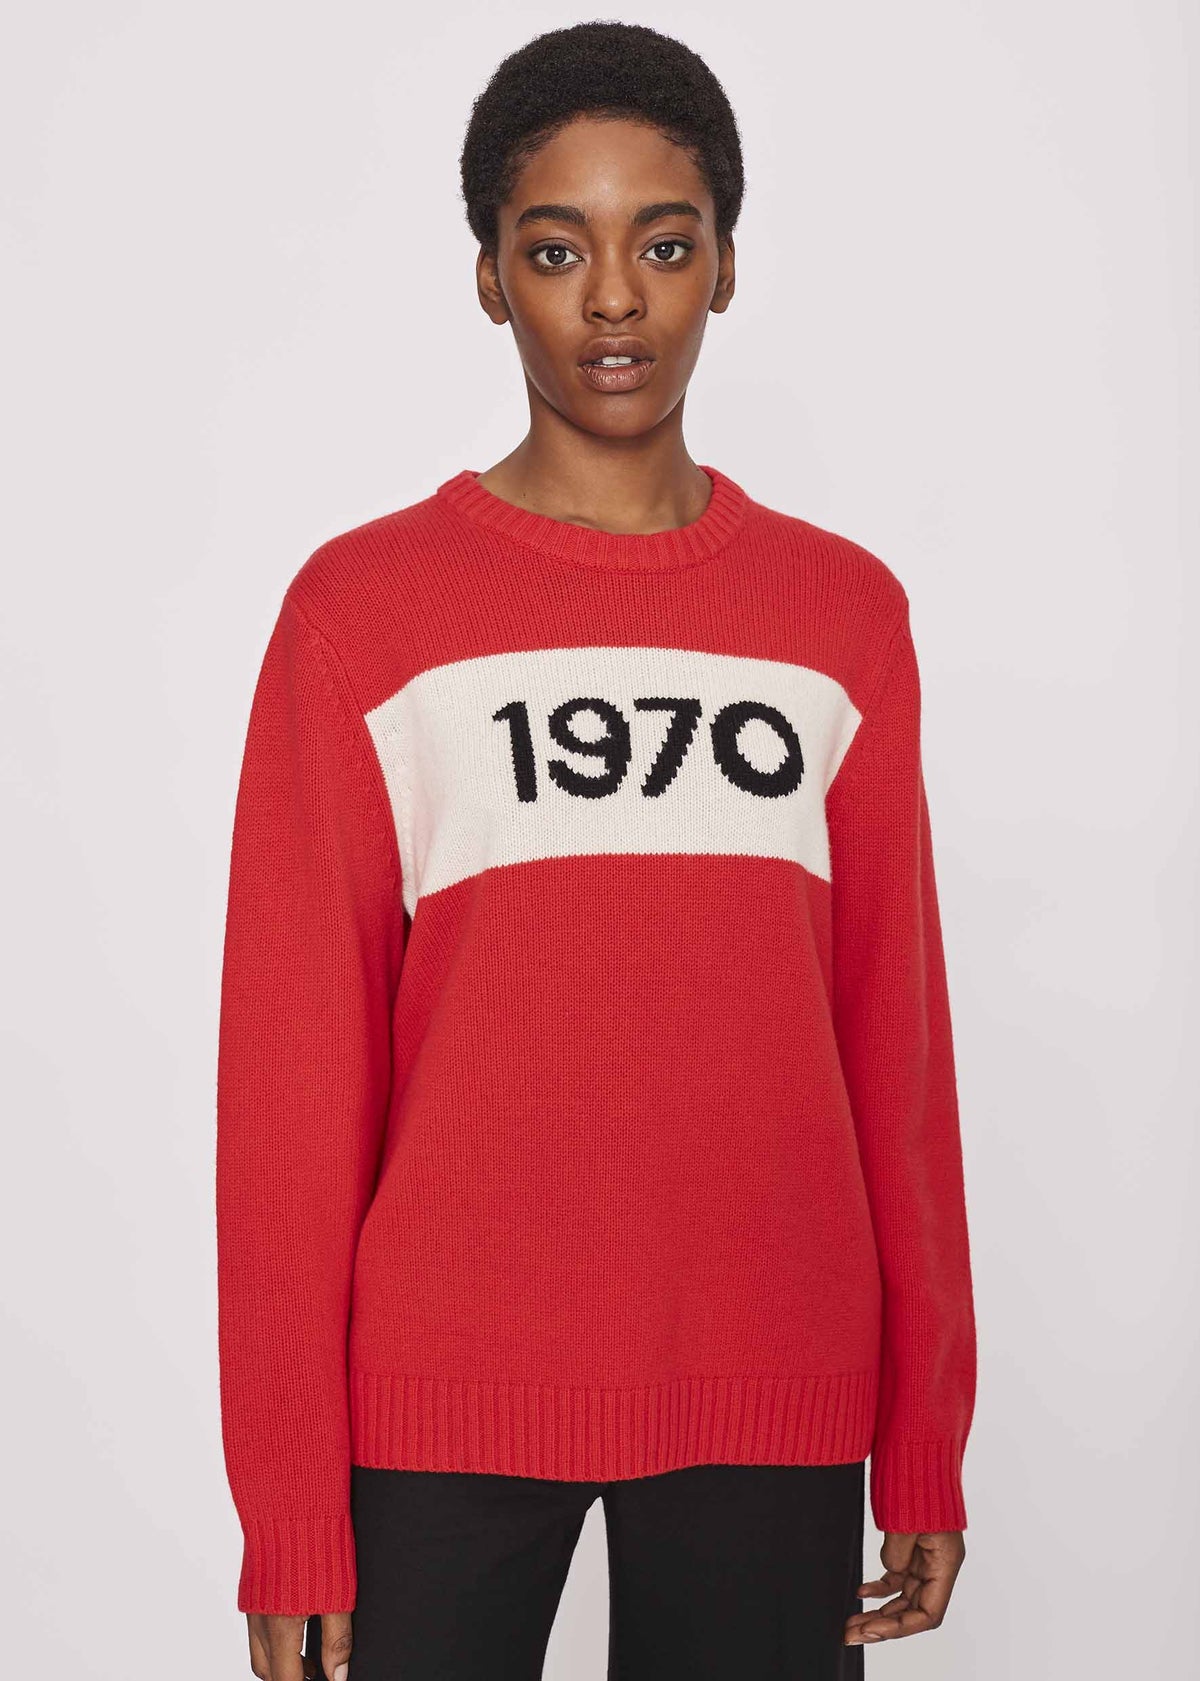 BF 1970 Oversized Jumper in Red